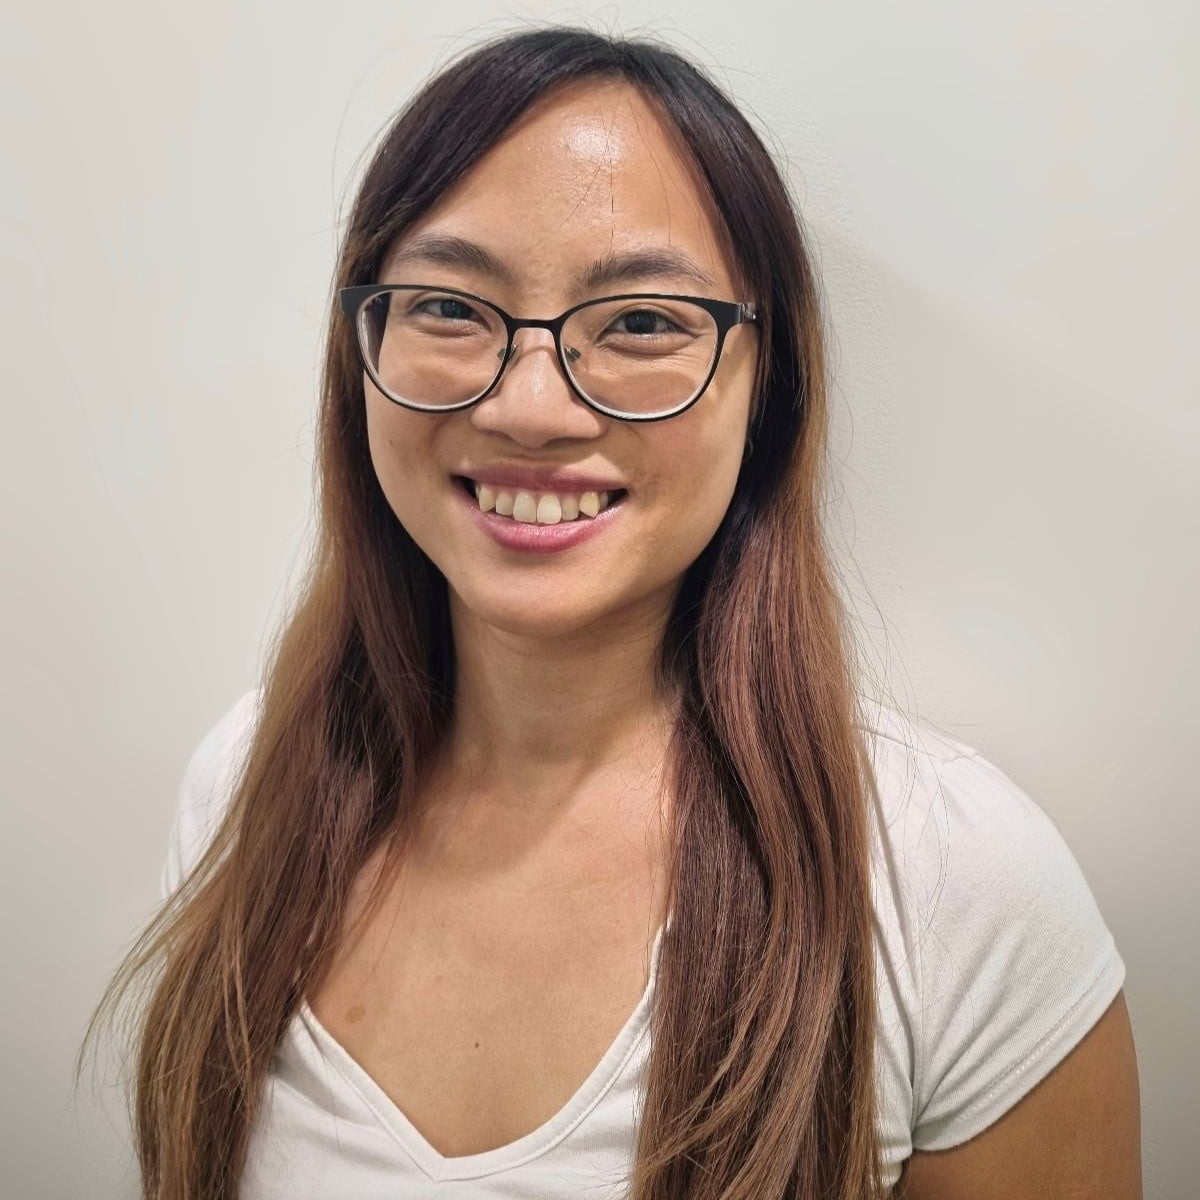 A smiling Asian woman named Serena Lee, wearing glasses and a white t-shirt, stands against a plain, light-colored background.